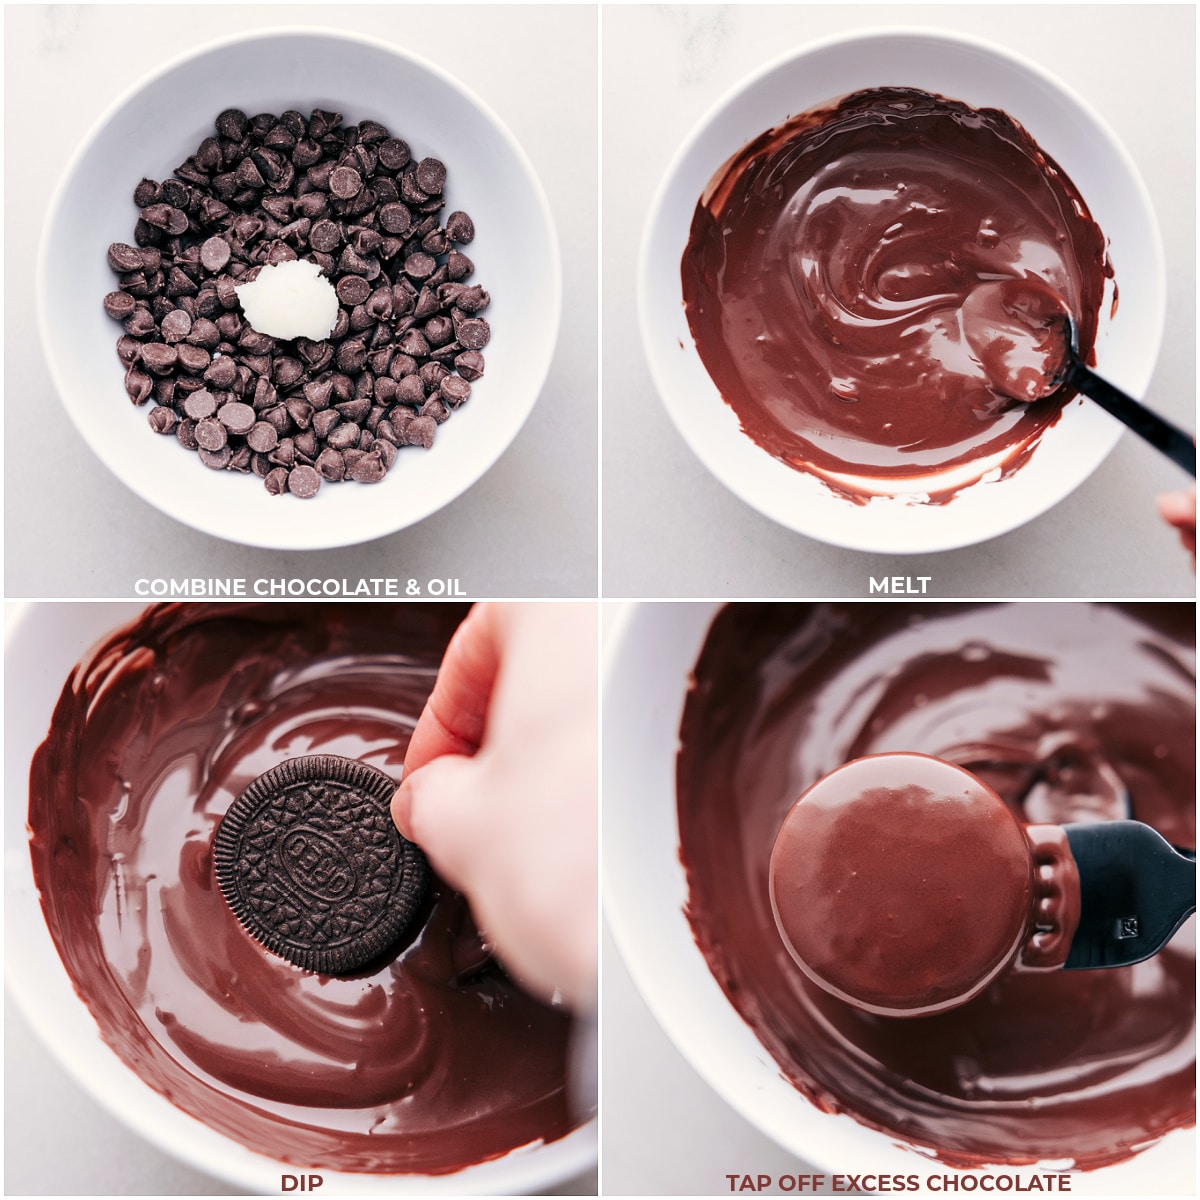 A series of images demonstrating melting chocolate and dipping the treats in it.